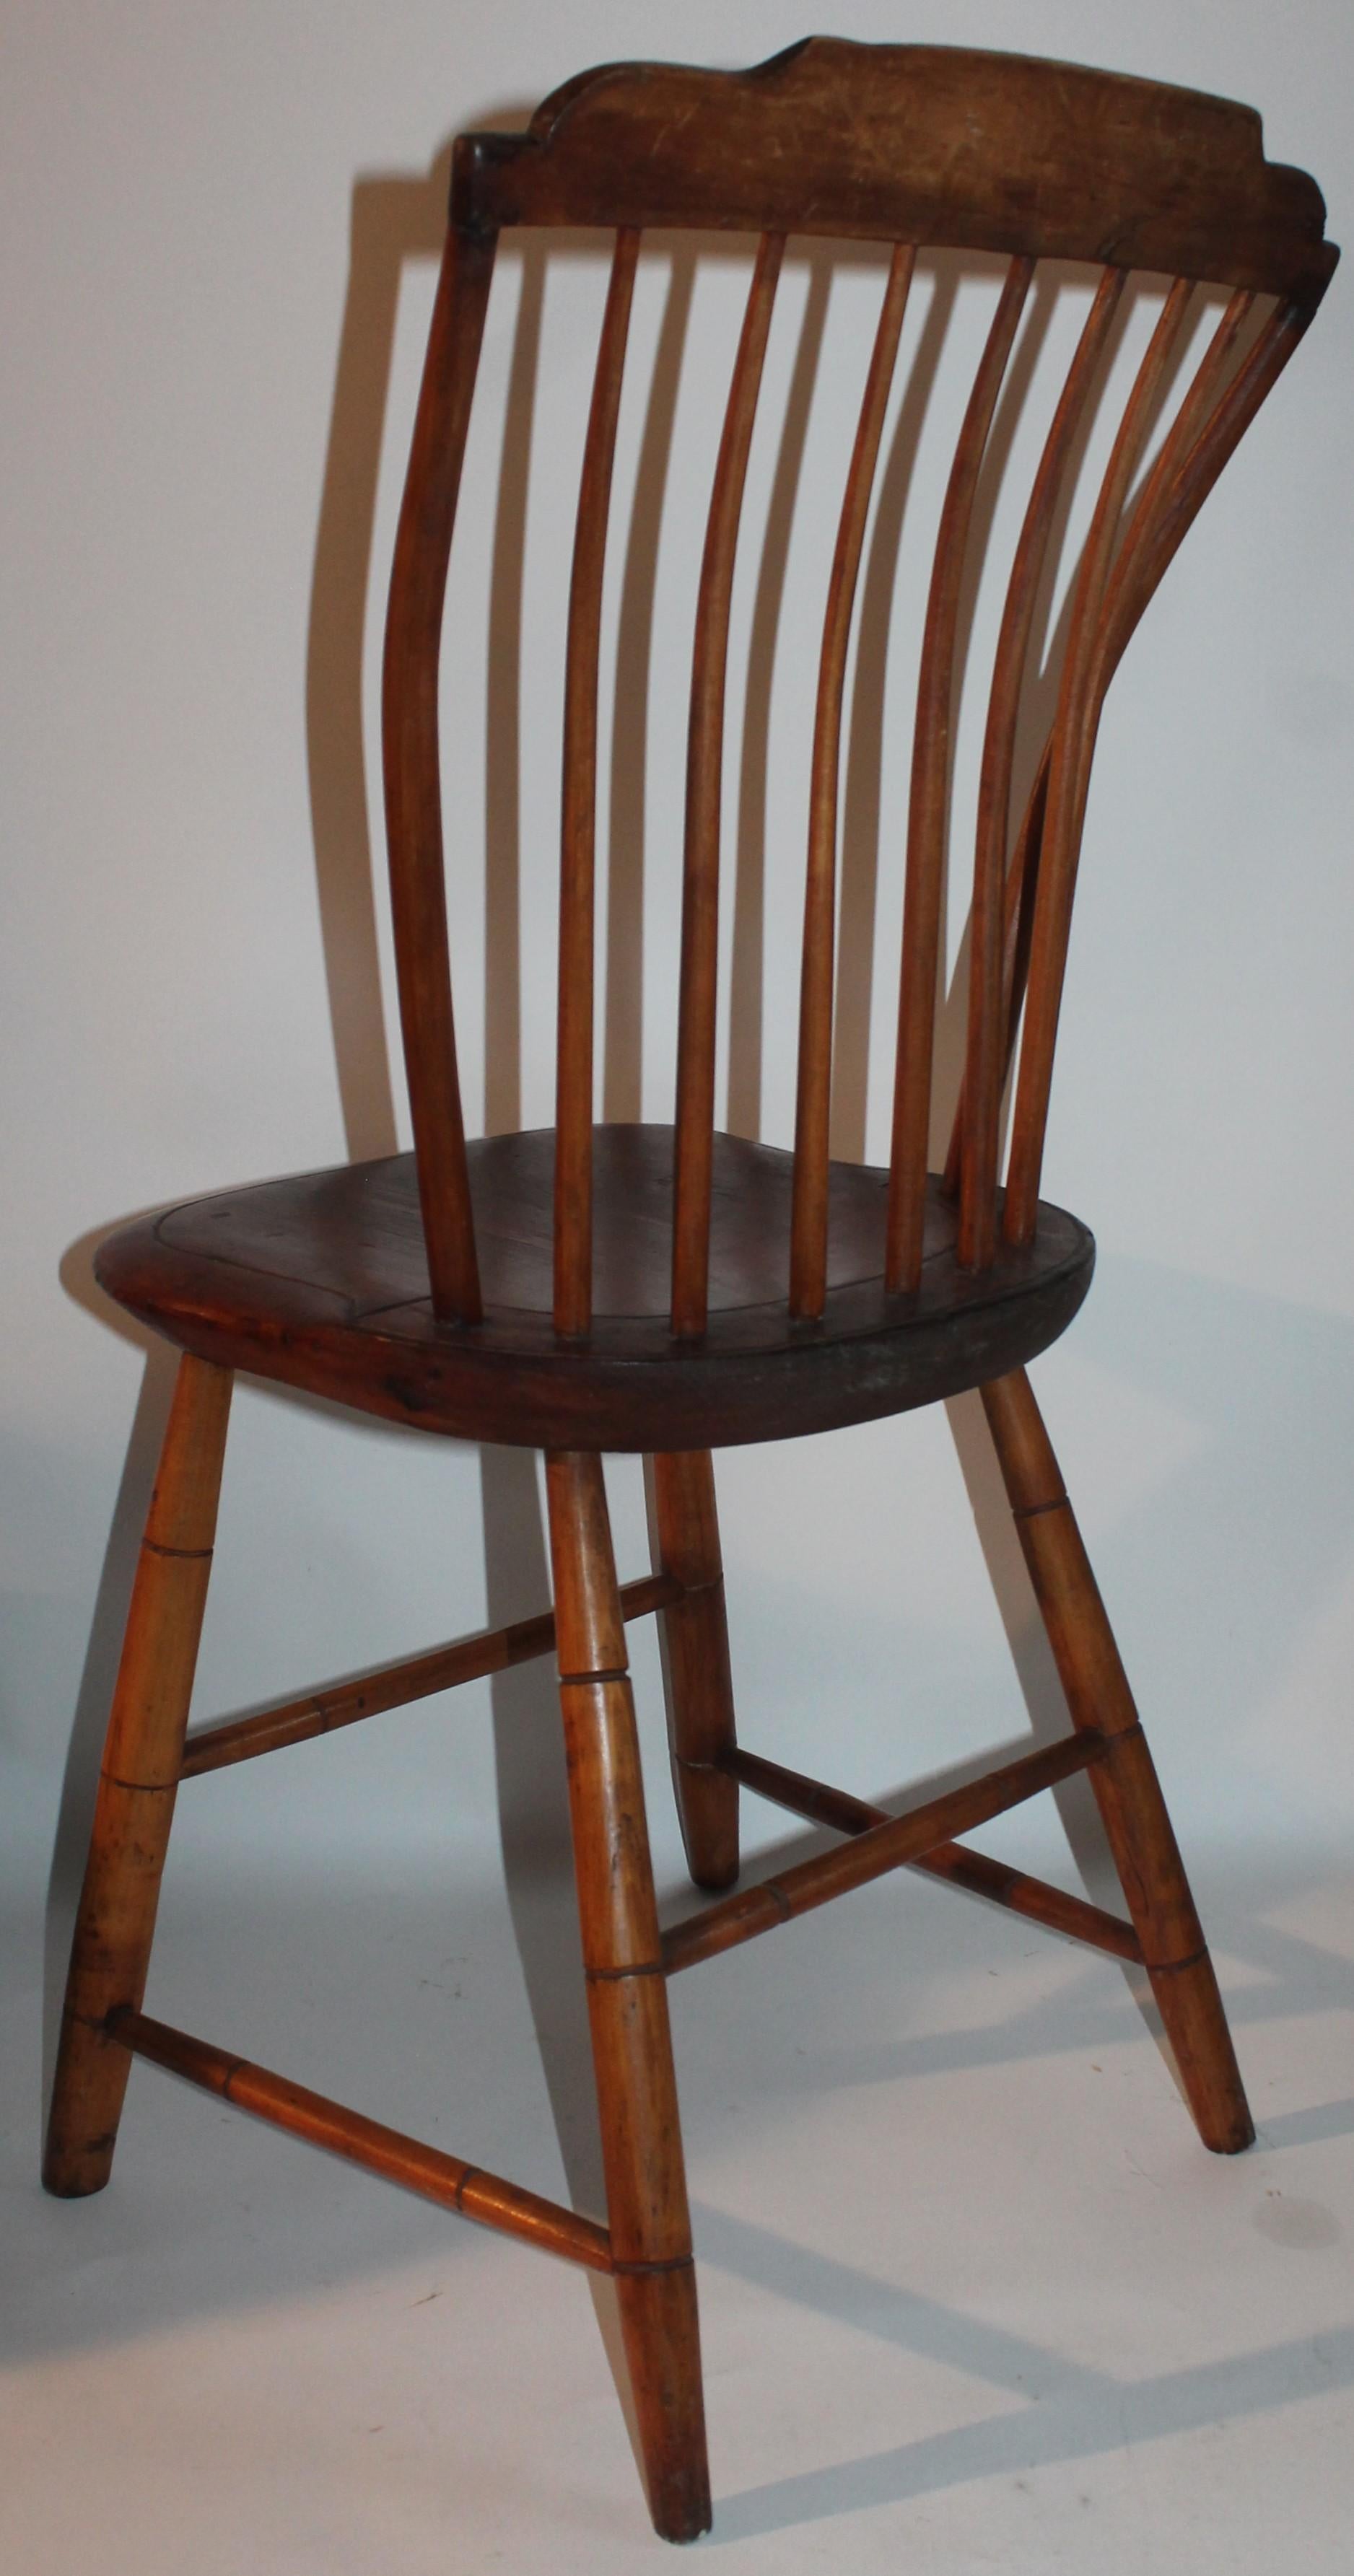 Hand-Crafted Pair of 18th Century Step Down Windsor Chairs